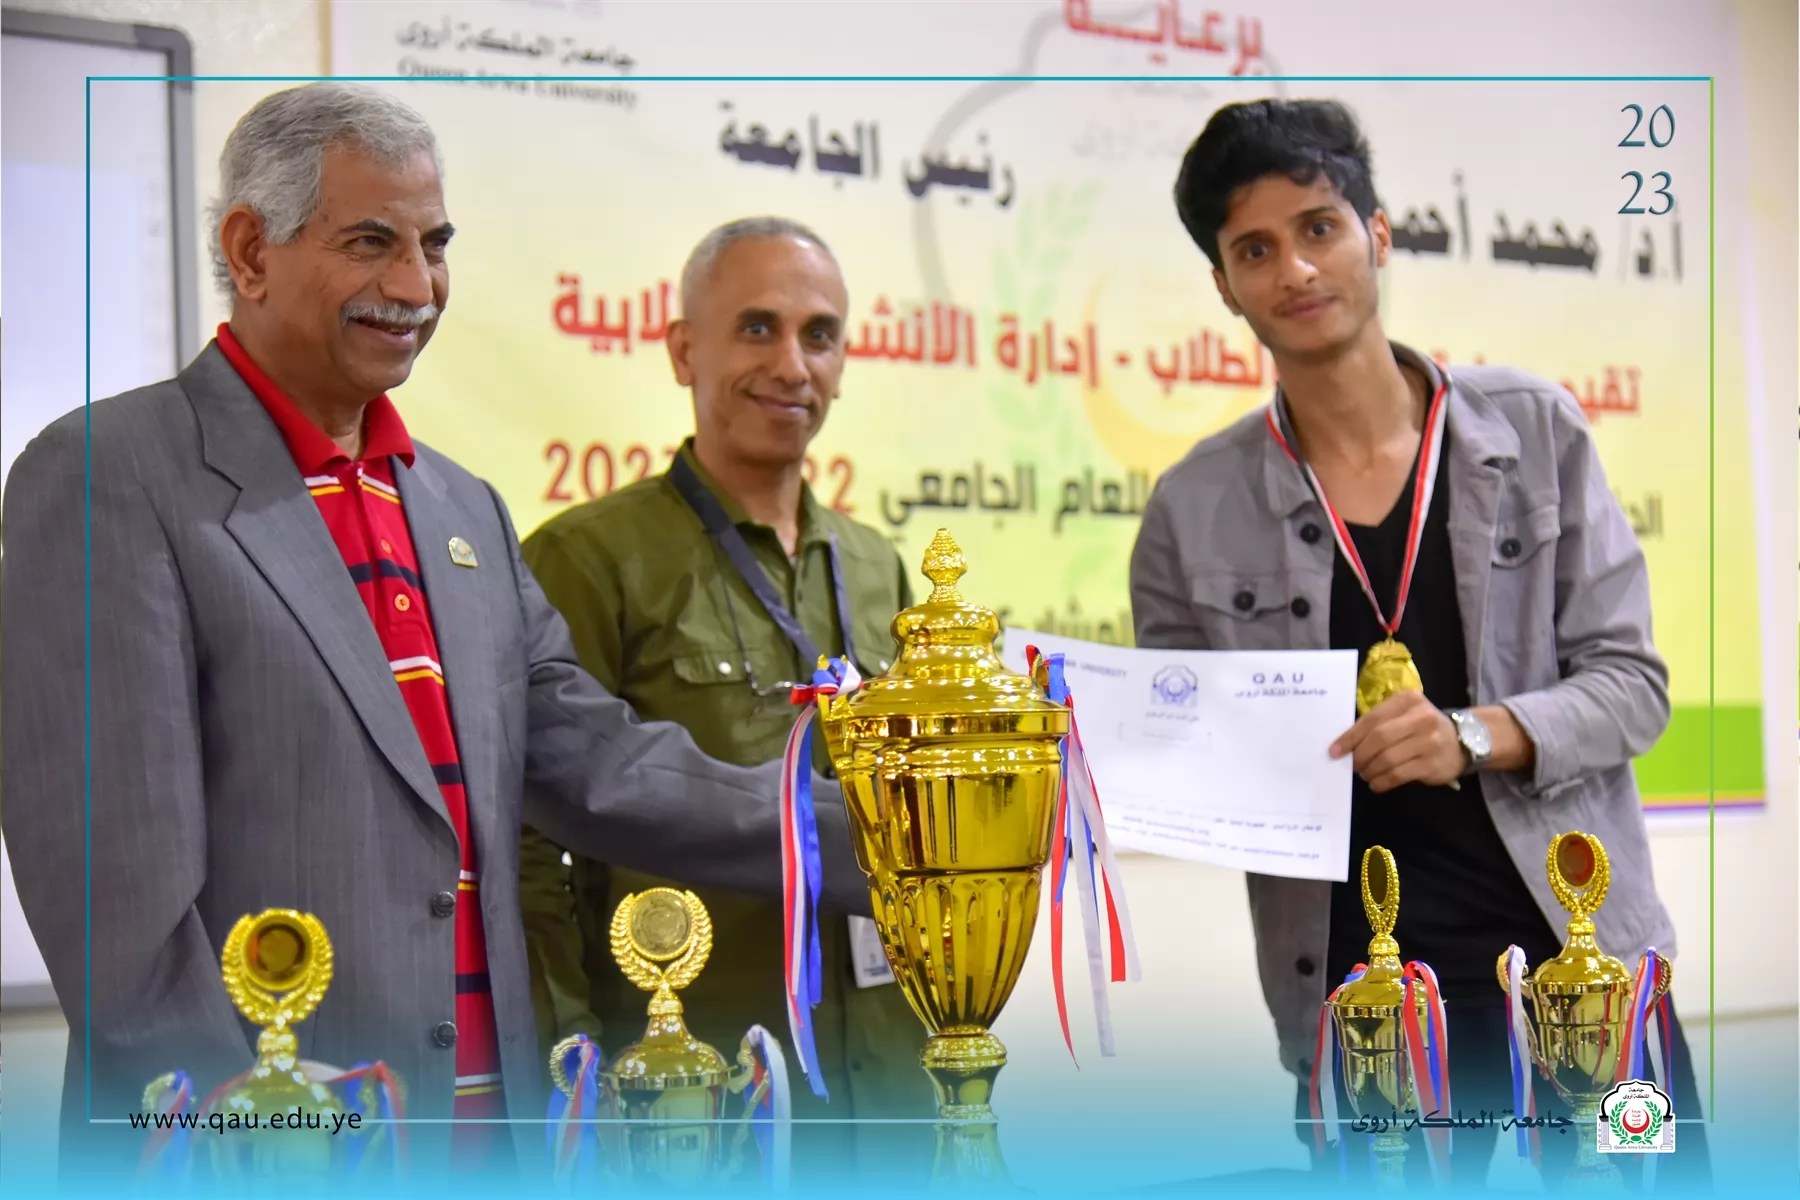 Queen Arwa University organizes its closing ceremony for student activities to honour a constellation of workers and participating students